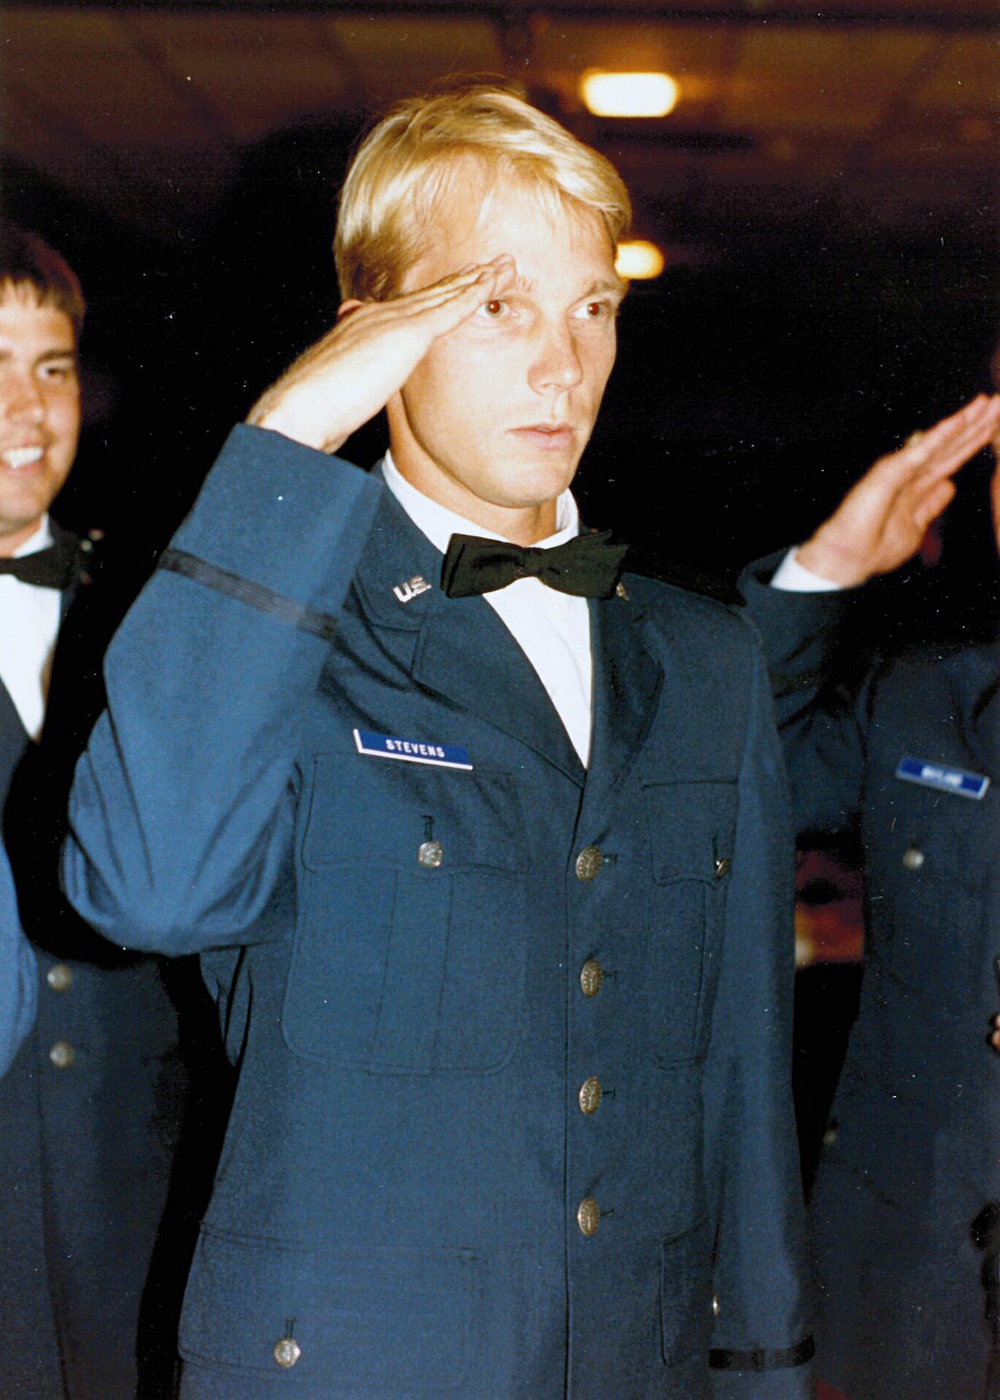 1986 Air Guard candidate ceremony